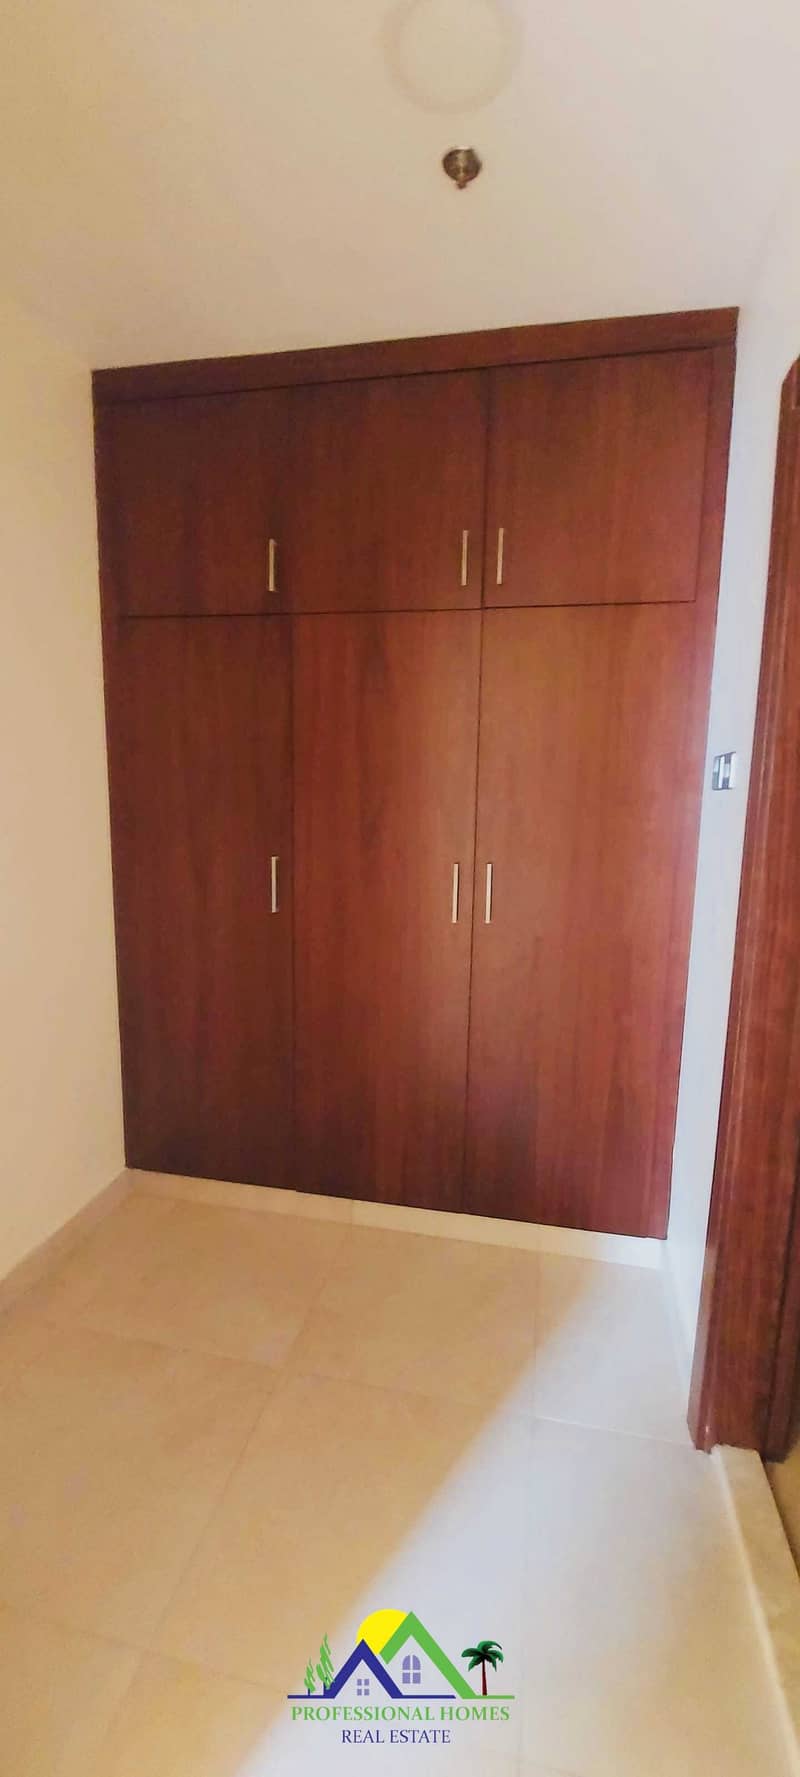 4 Amazing Quality 2 BR Apartment in Jimi